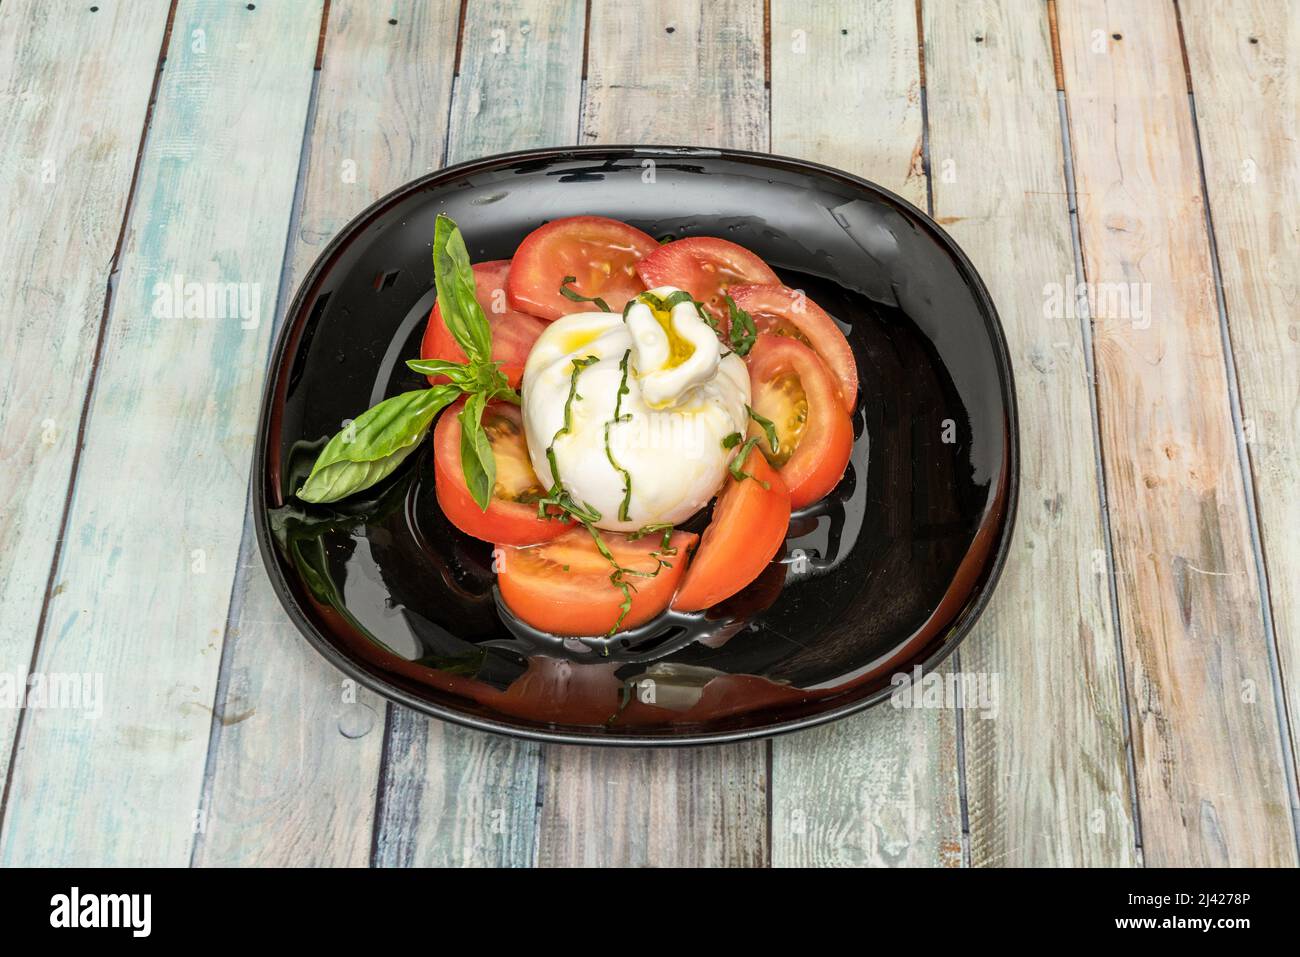 Burrata goes well with most products, and you can combine it by cutting off the outer pieces of mozzarella and adding them to salads or pasta dishes. Stock Photo